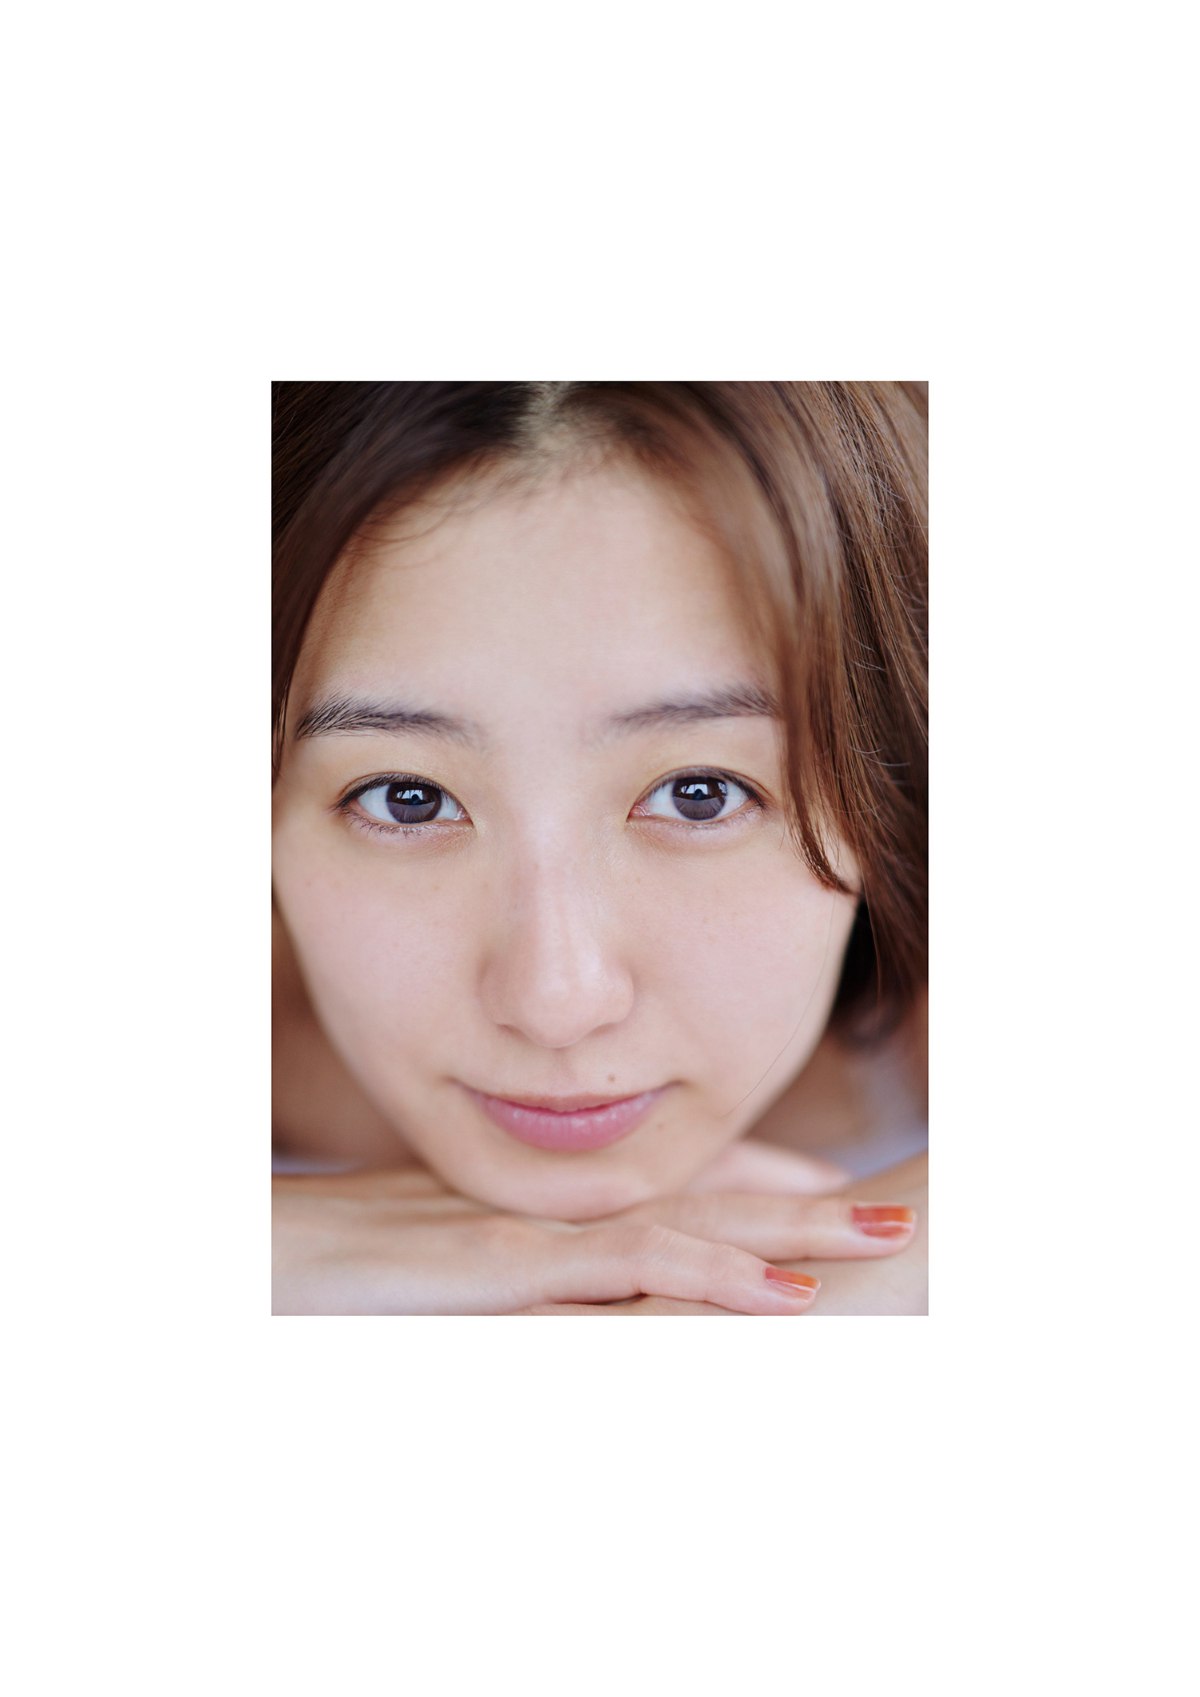 Weekly Pre Photo Book 2022 10 31 Riho Takada 高田里穂 Completed Unfinished Another Edition 0072 0665254178.jpg